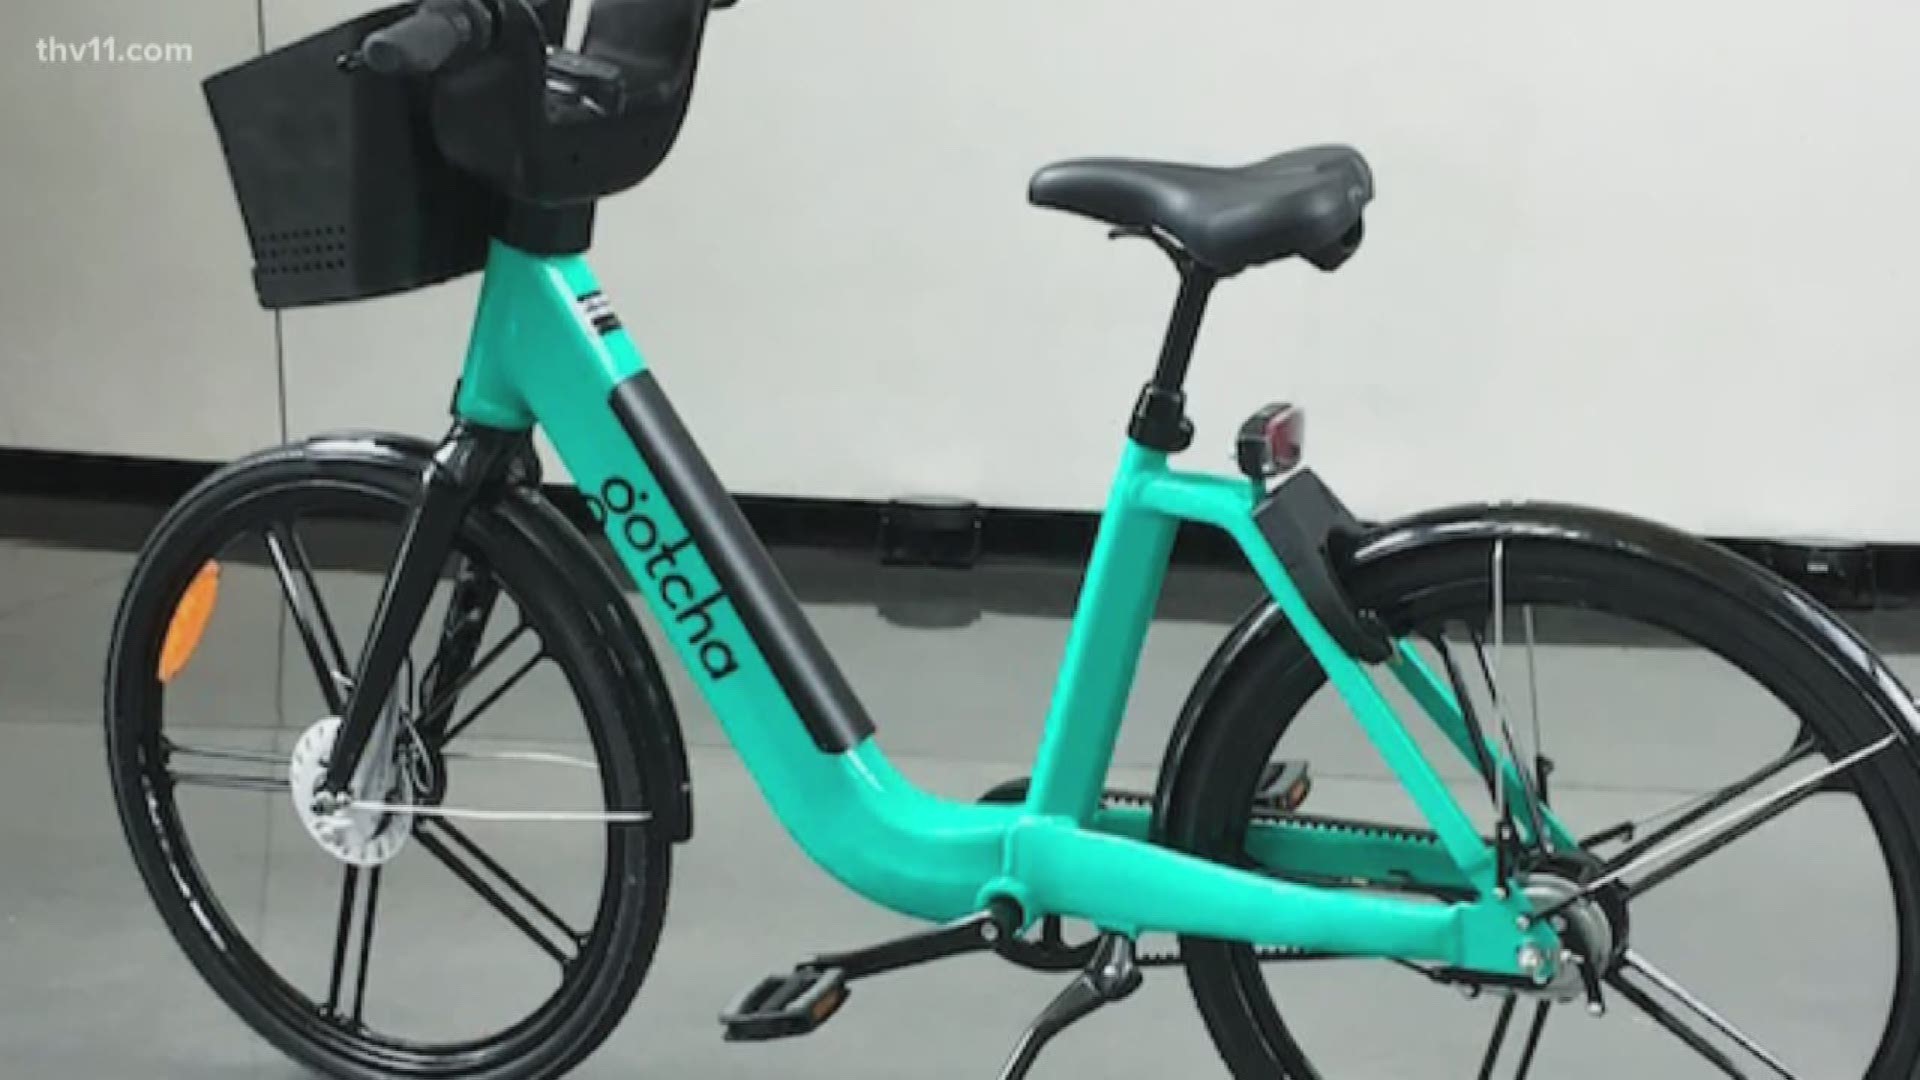 North Little Rock is gearing up to launch its very first bike sharing program.